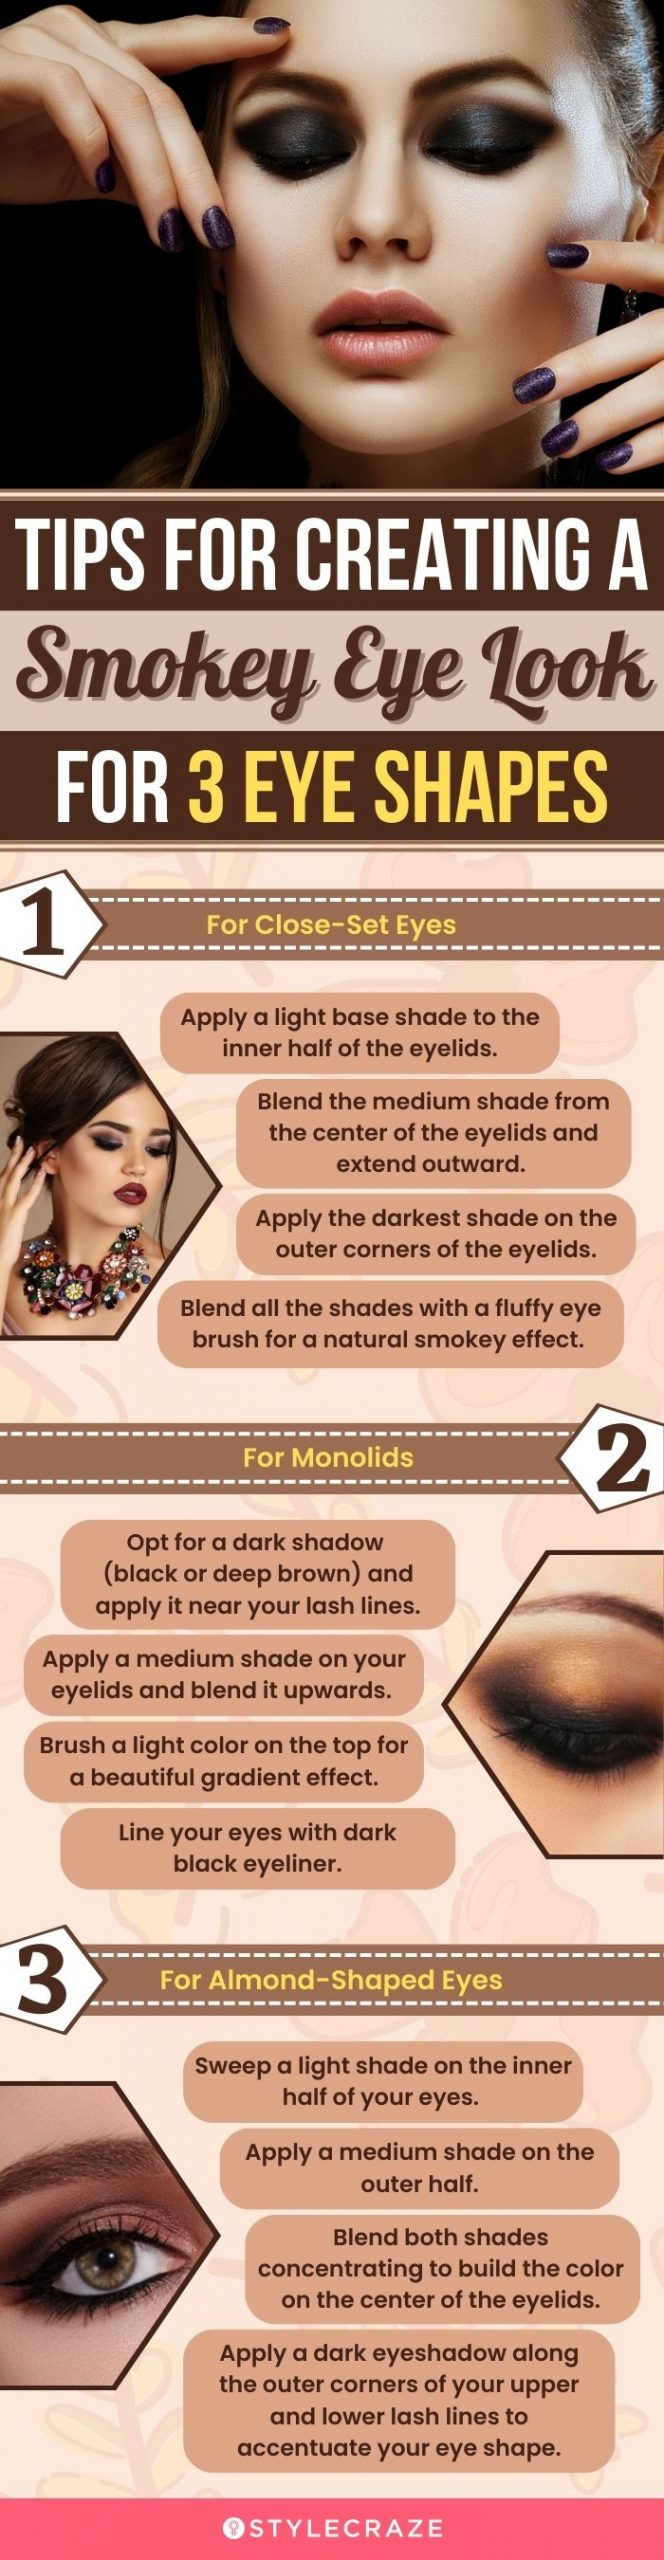 Tips For Creating A Smokey Eye Look (infographic)